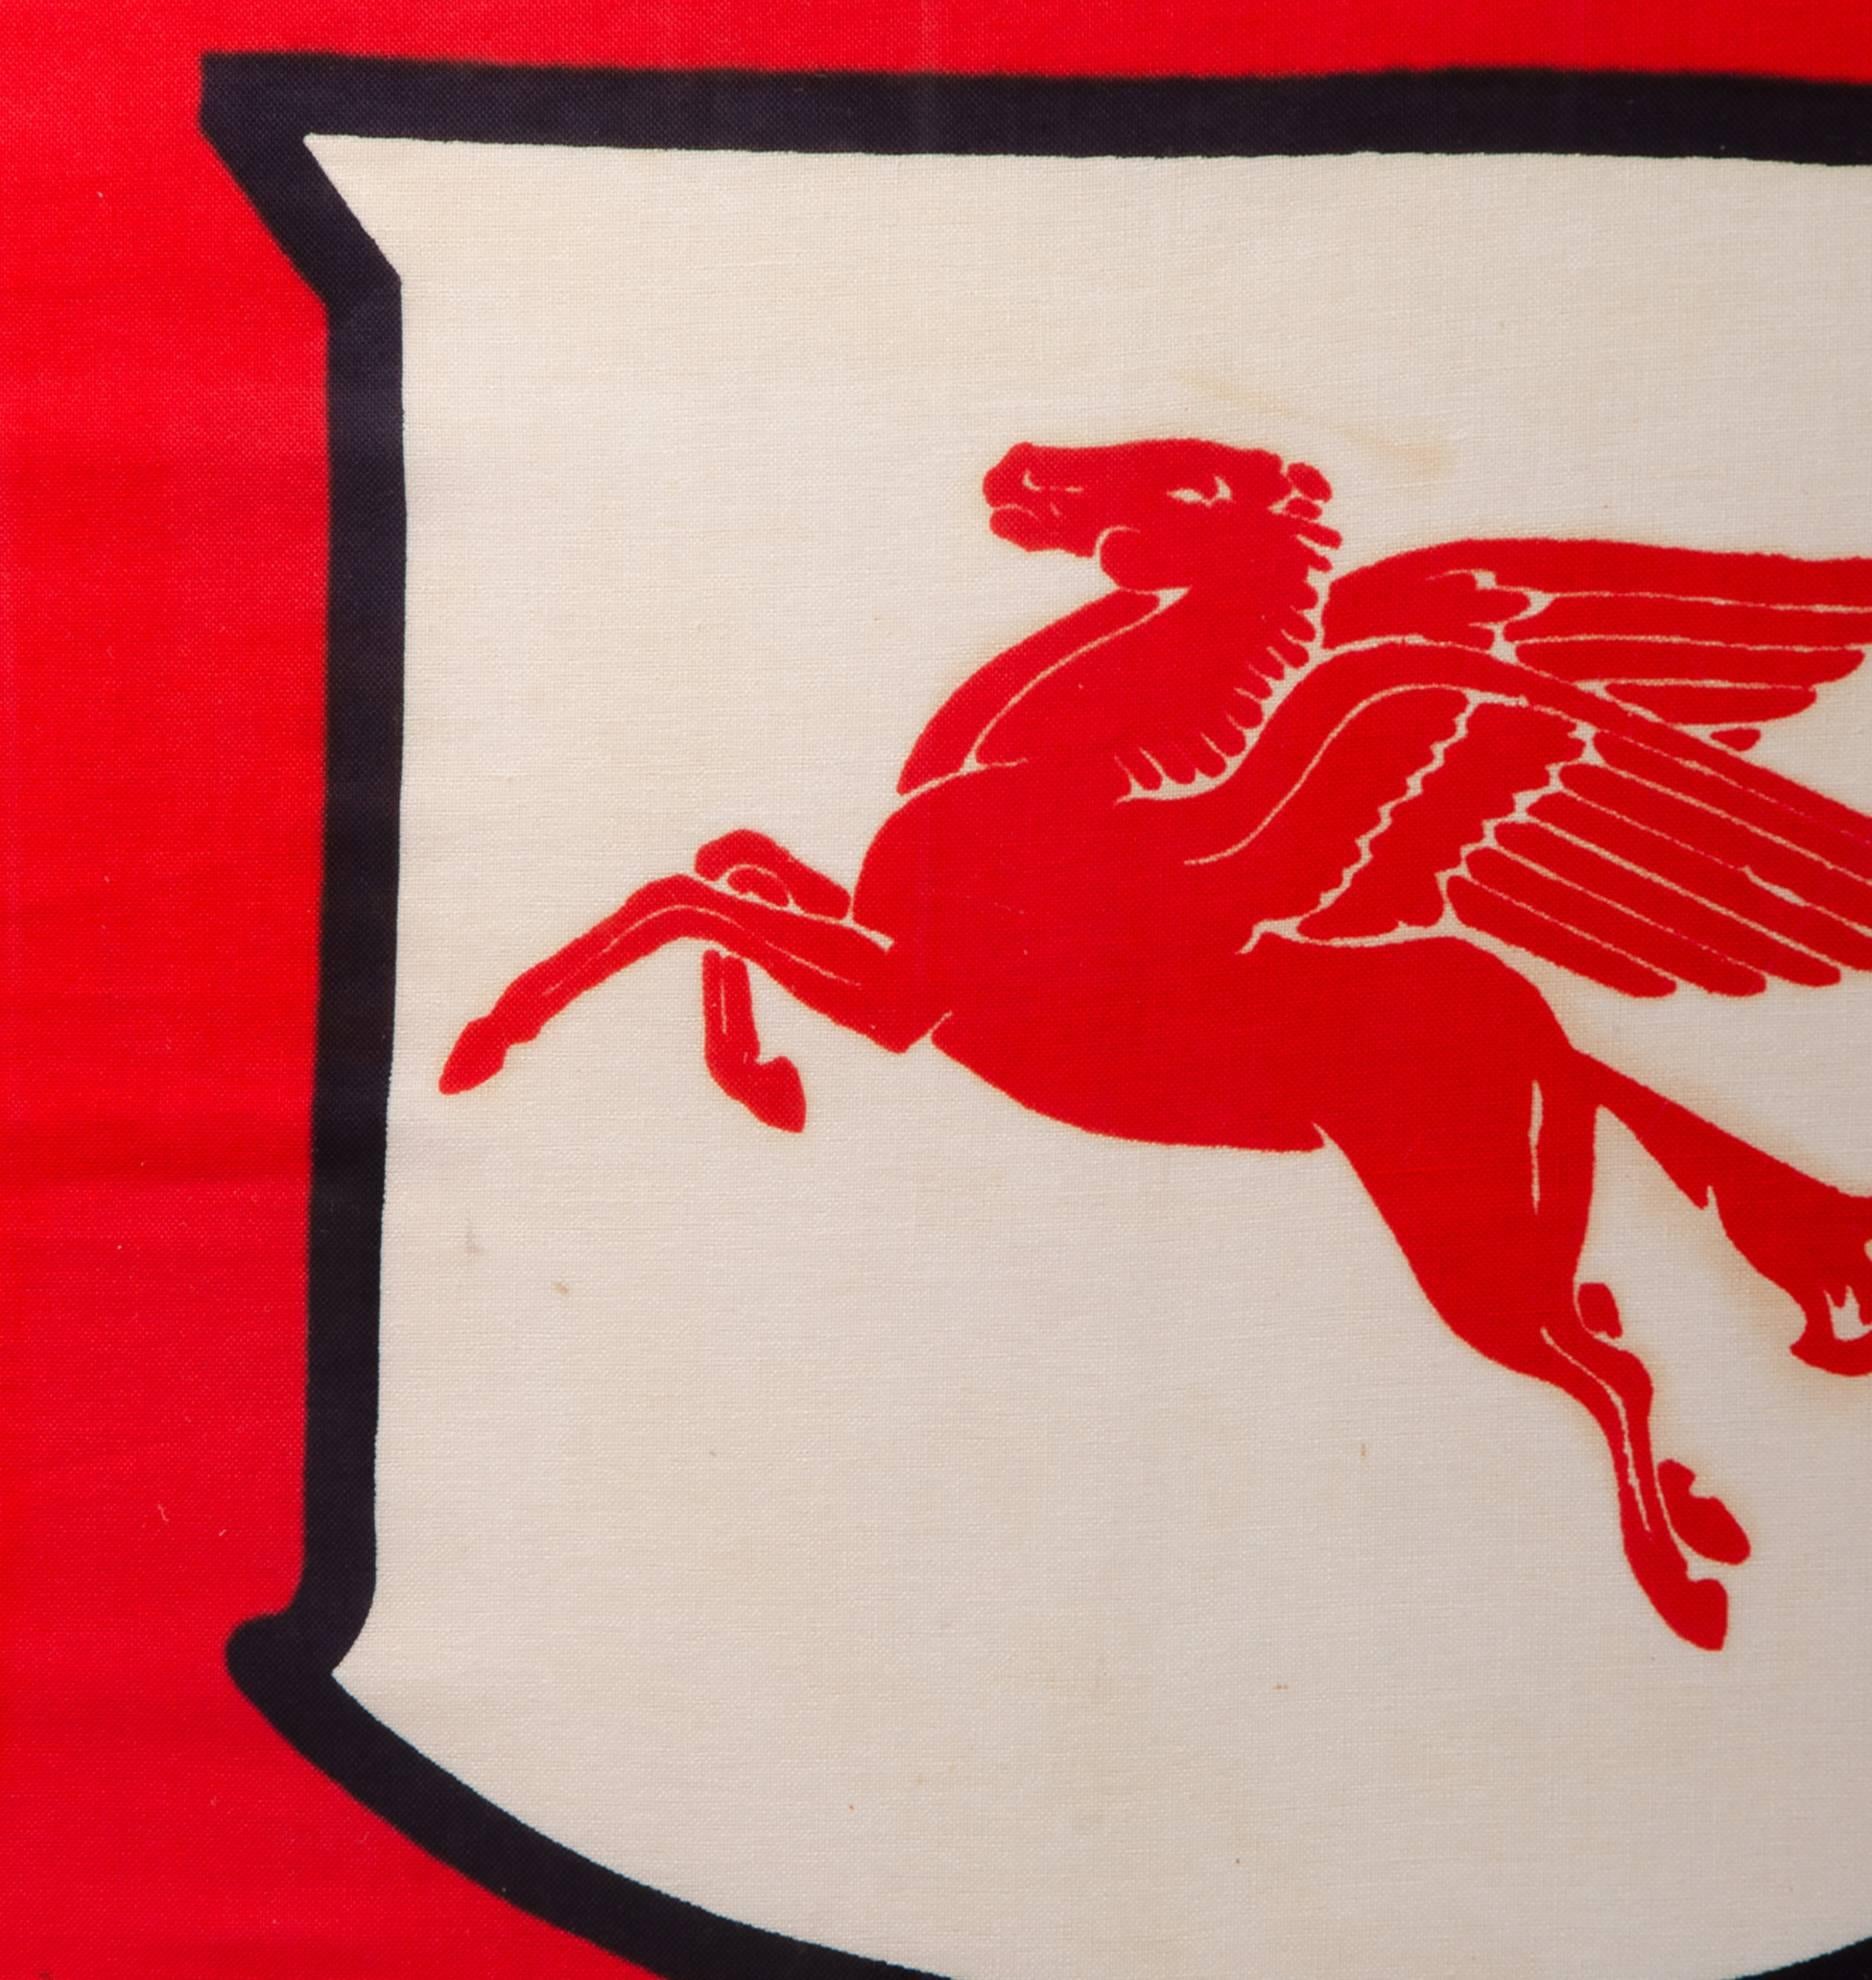 An incredible relic from a Mid-Century raceway, this Mobil gas flag depicts the iconic Pegasus on a shield over a bright red background. The pattern appears to be screen printed, with very little bleed between the colors.